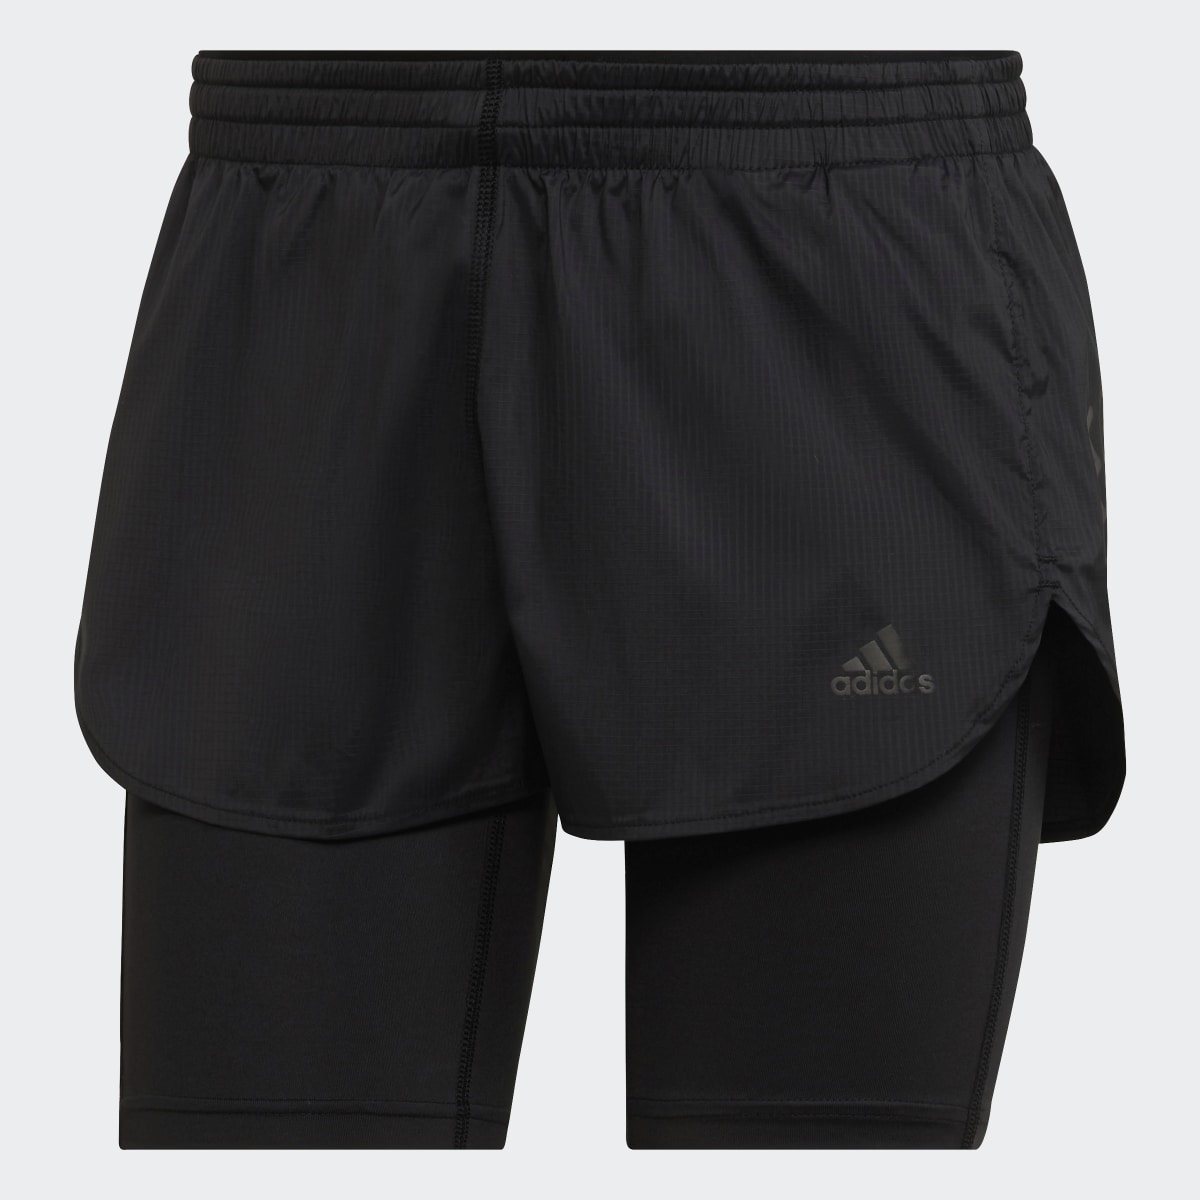 Adidas Run Fast Two-in-One Shorts. 4